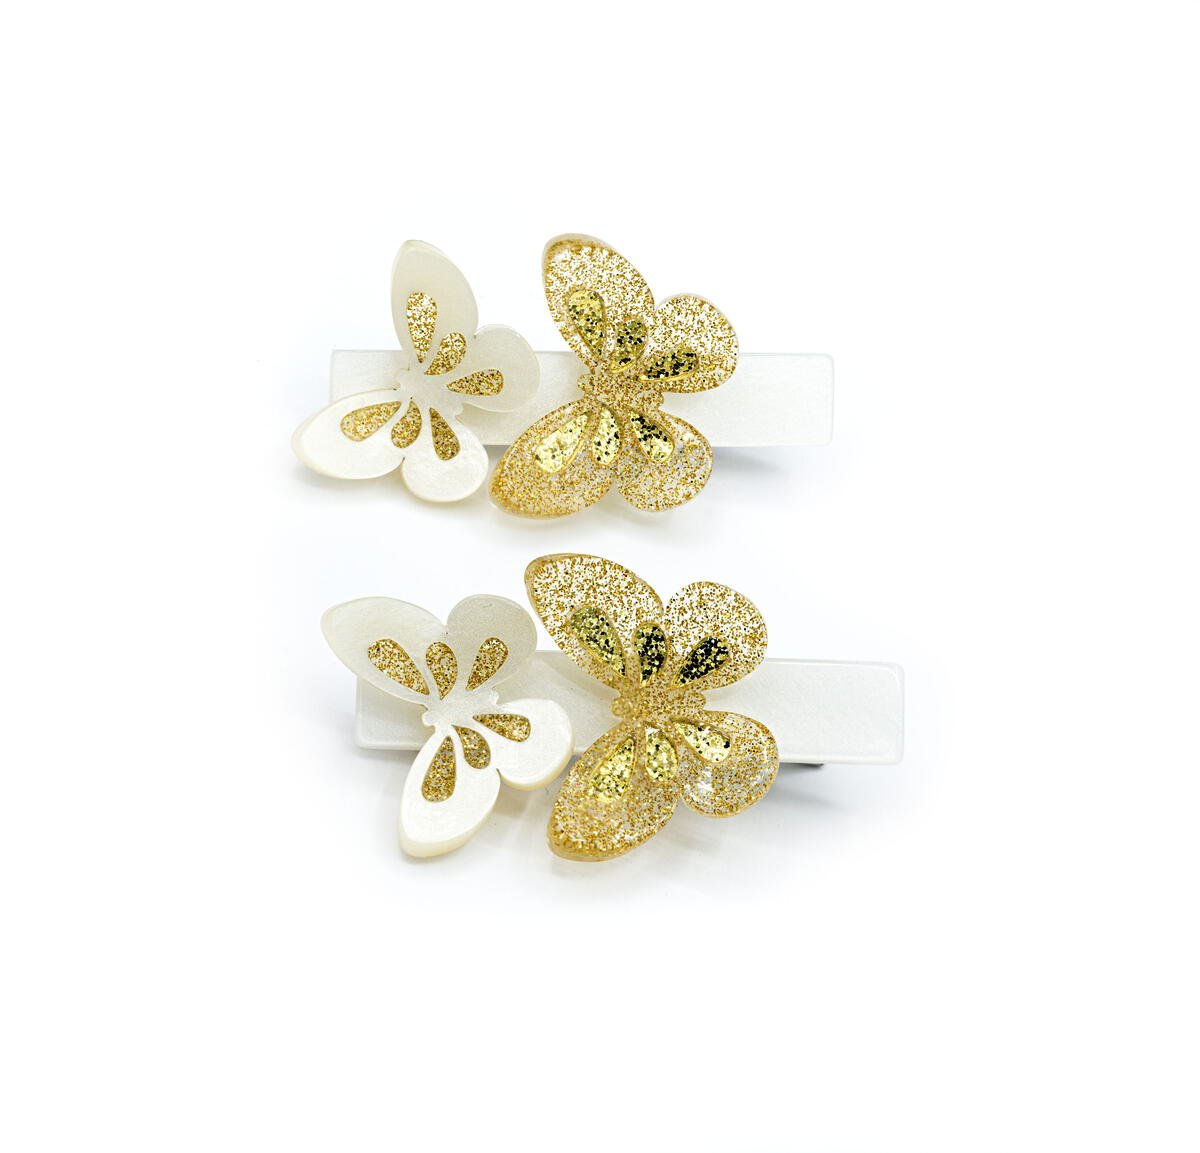 BUTTERFLY PEARLIZED ALLIGATOR CLIPS (PREORDER) - LILIES & ROSES